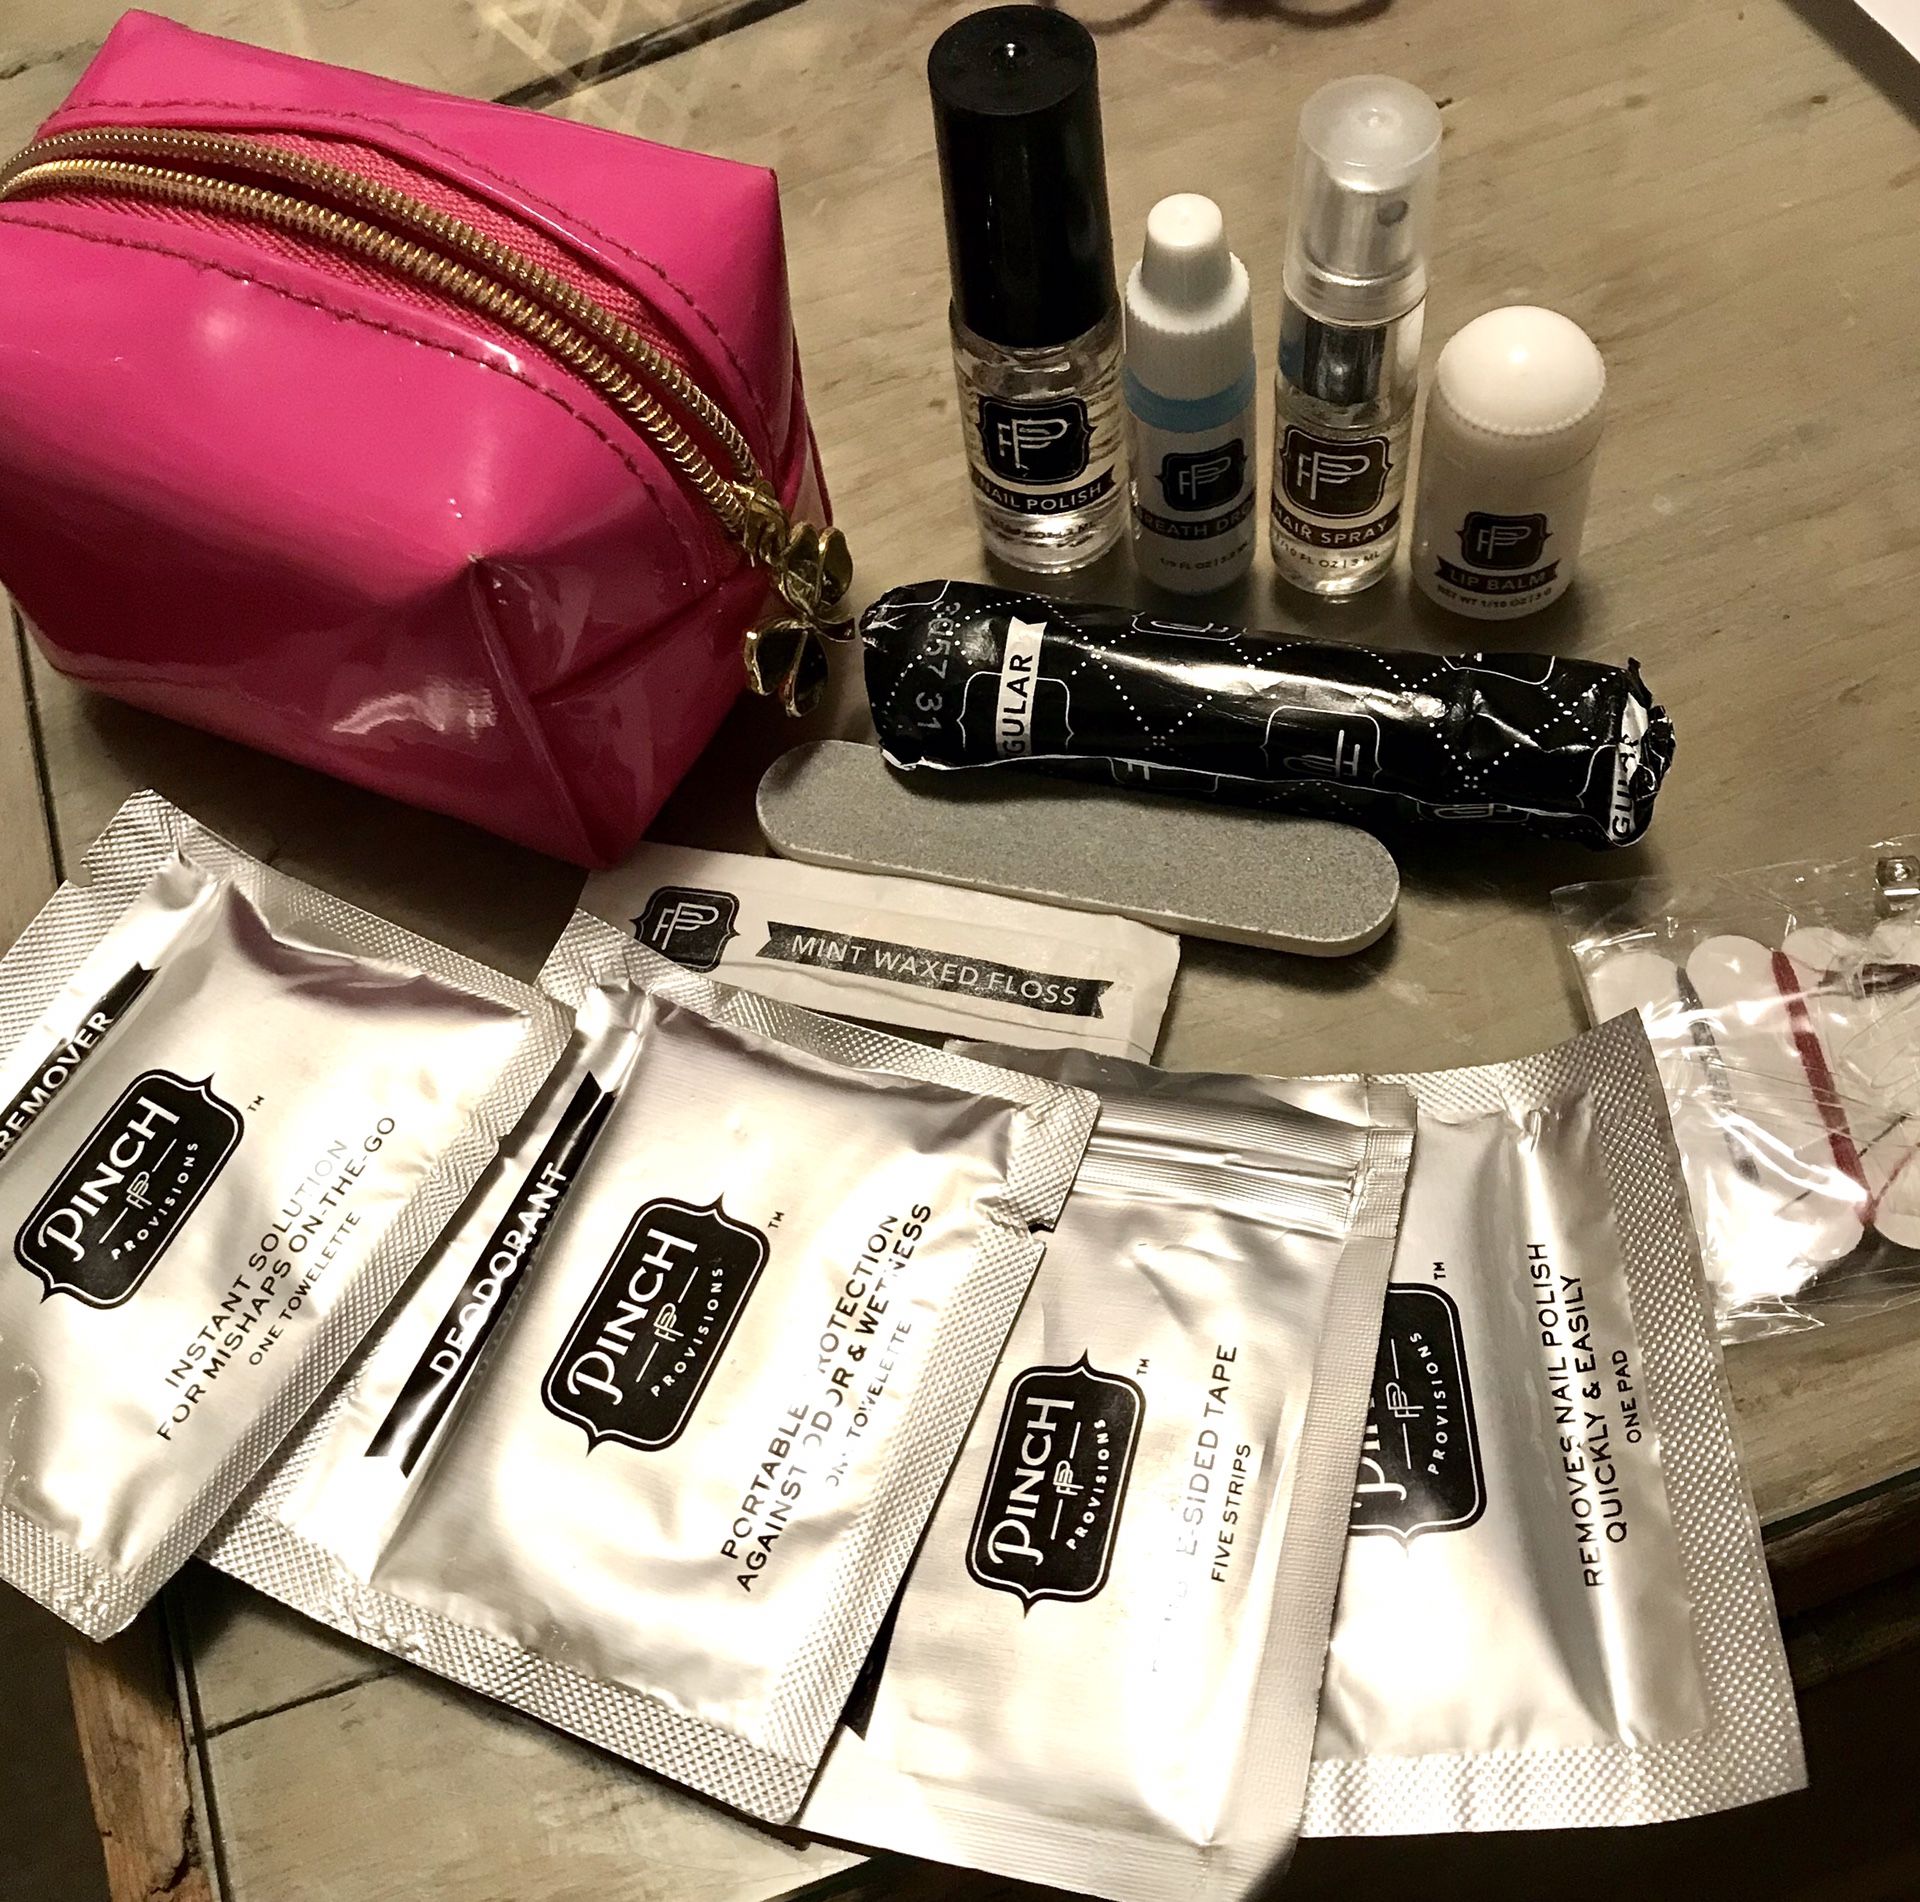 Minimergency kit from Sephora for a gal’s little emergencies